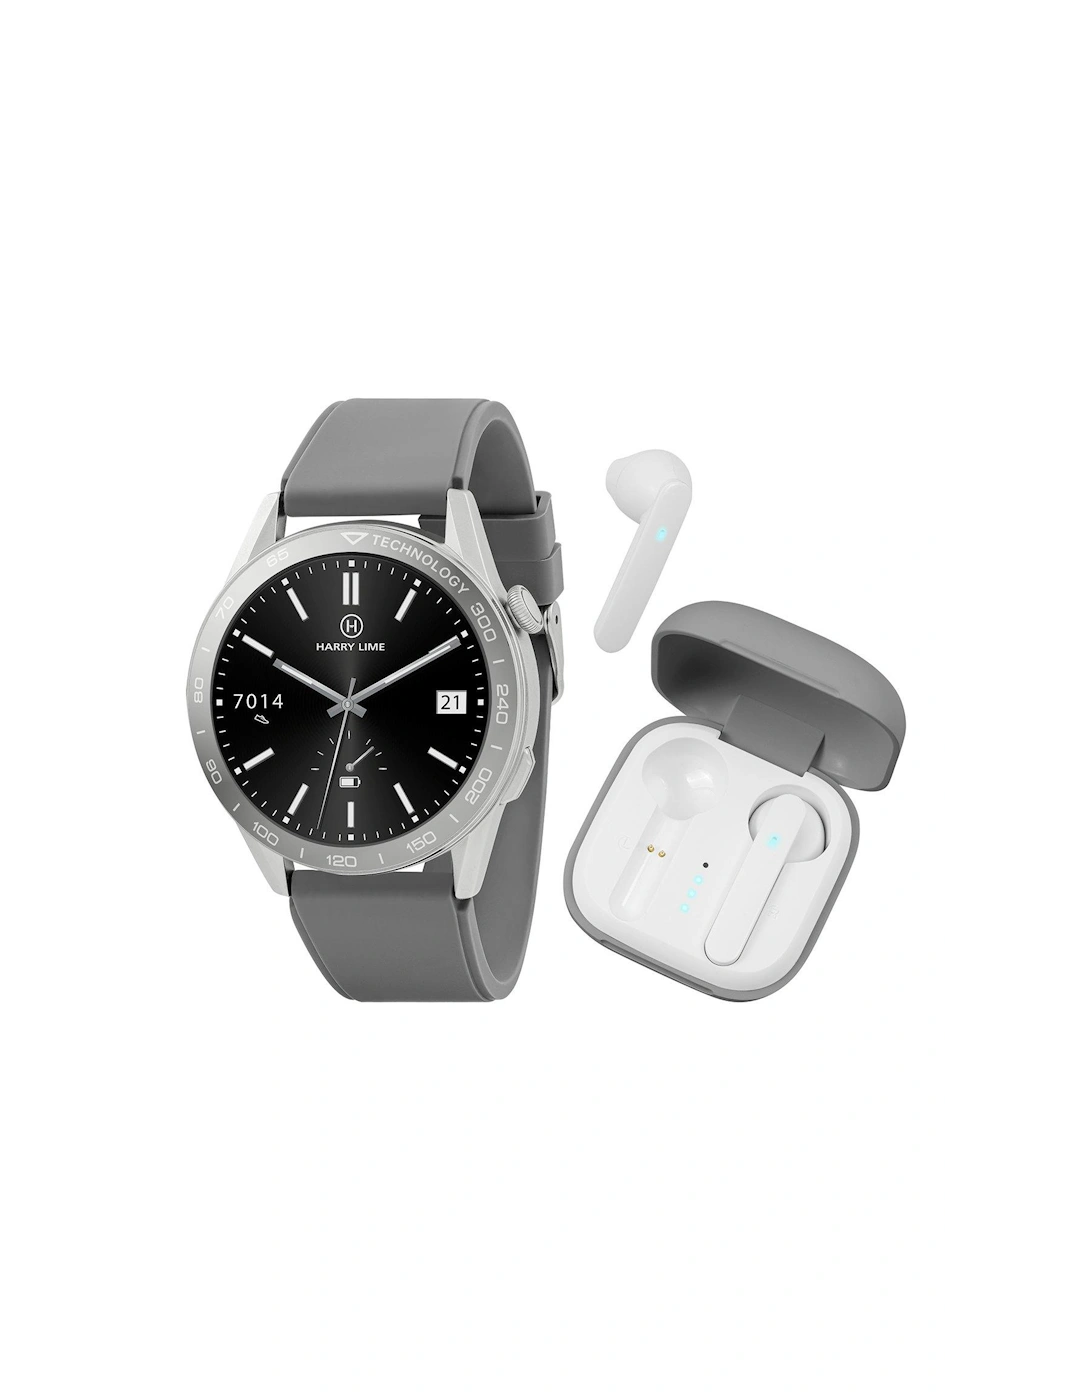 Series 27 Grey Silicone Strap Smart Watch With Grey True Wireless Earphone In Charging Case, 2 of 1